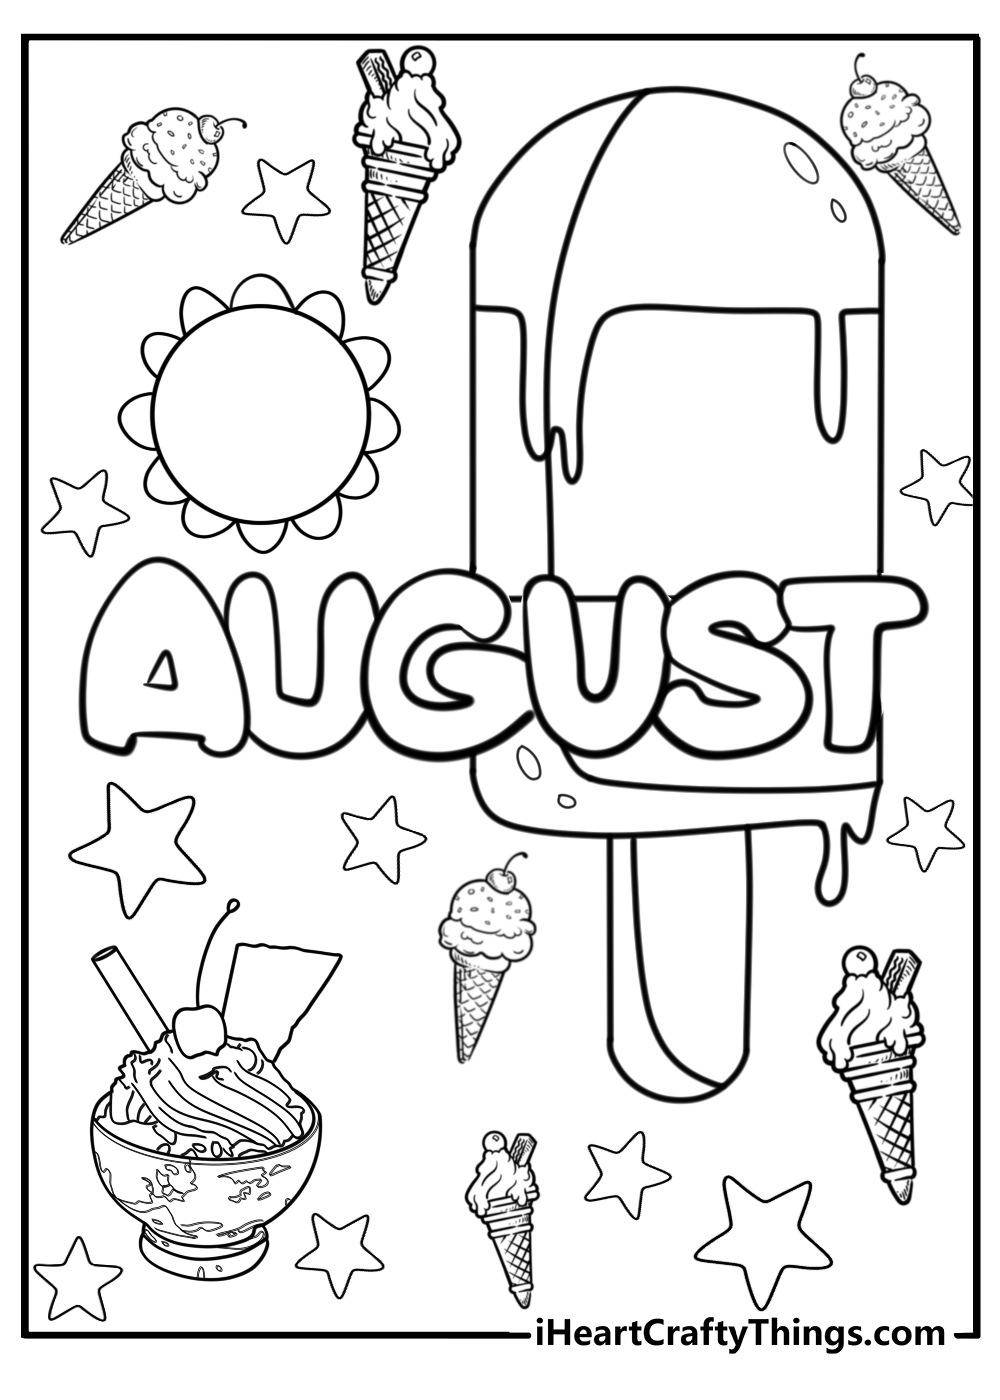 Ice cream august coloring page